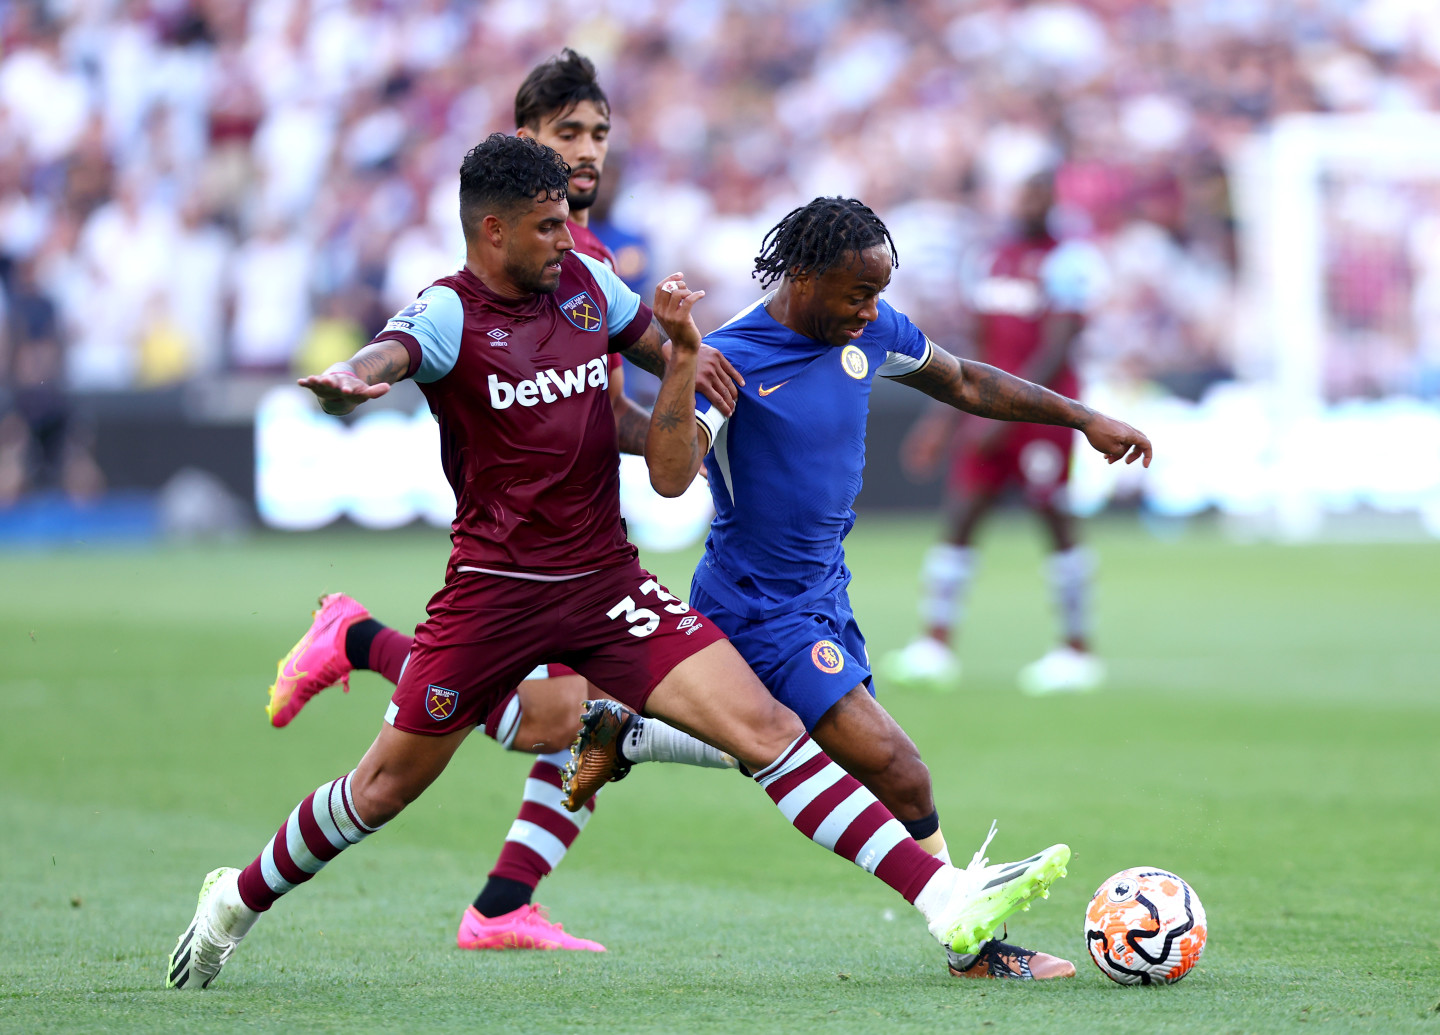 Report: West Ham 3 Chelsea 1 | News | Official Site | Chelsea Football Club